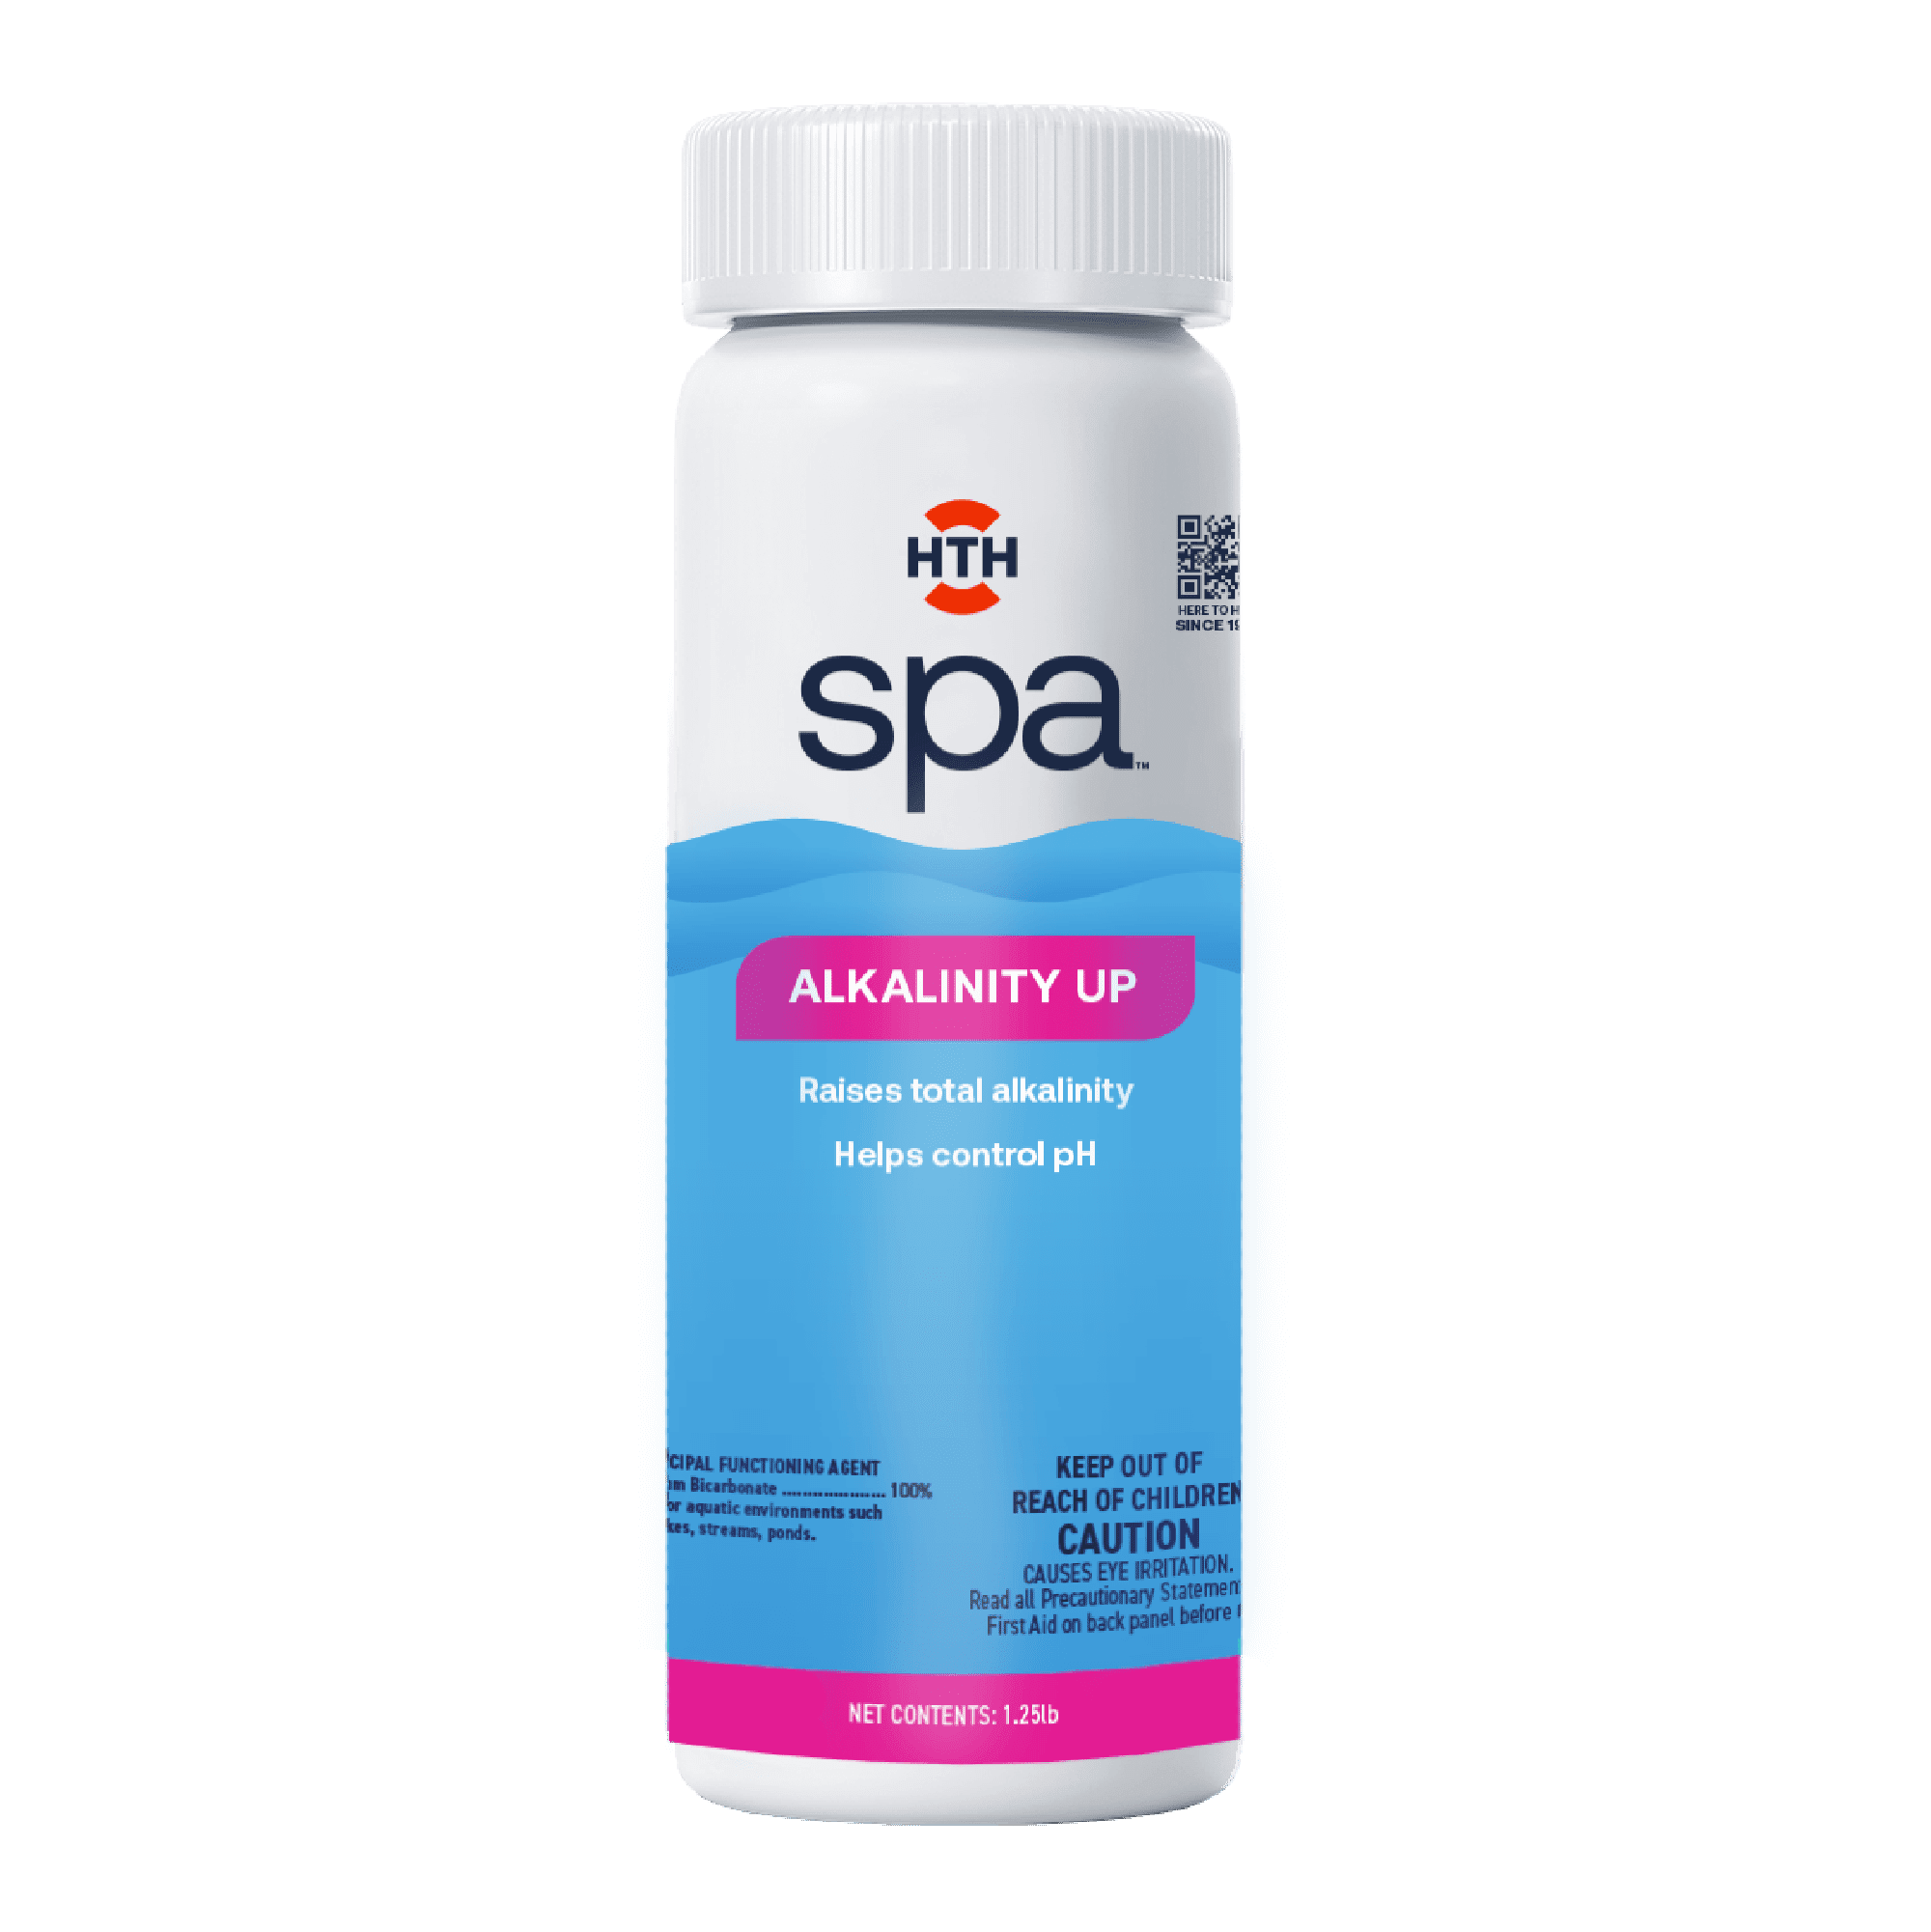 HTH Spa Care Alkalinity Up for Spas & Hot Tubs, 1.25lb (pool chemicals)